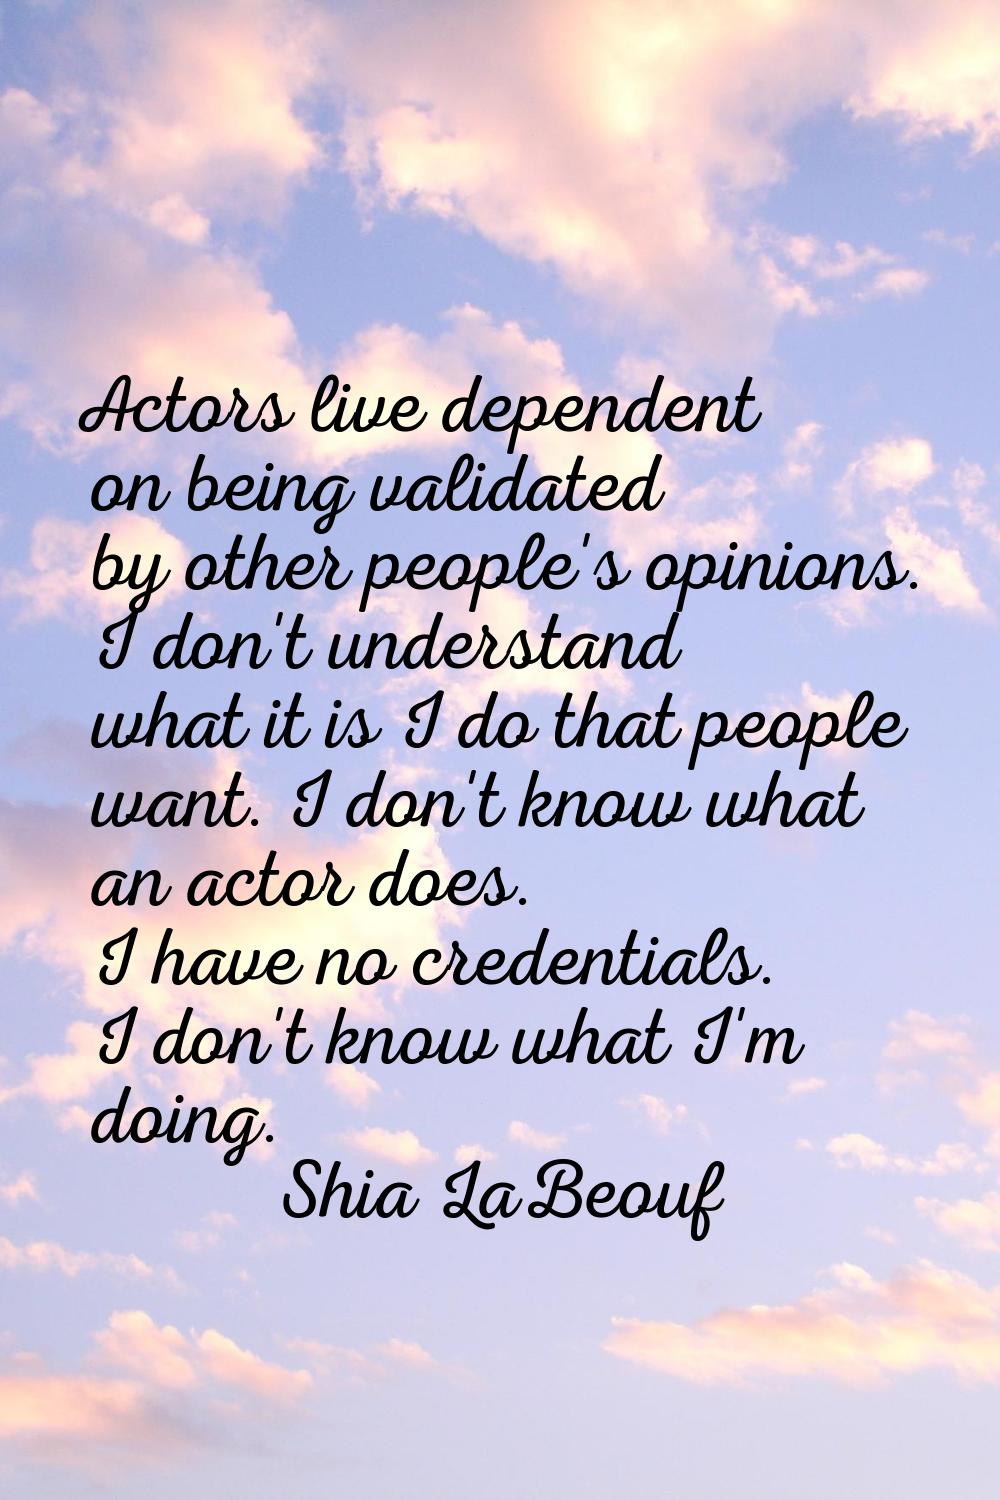 Actors live dependent on being validated by other people's opinions. I don't understand what it is 